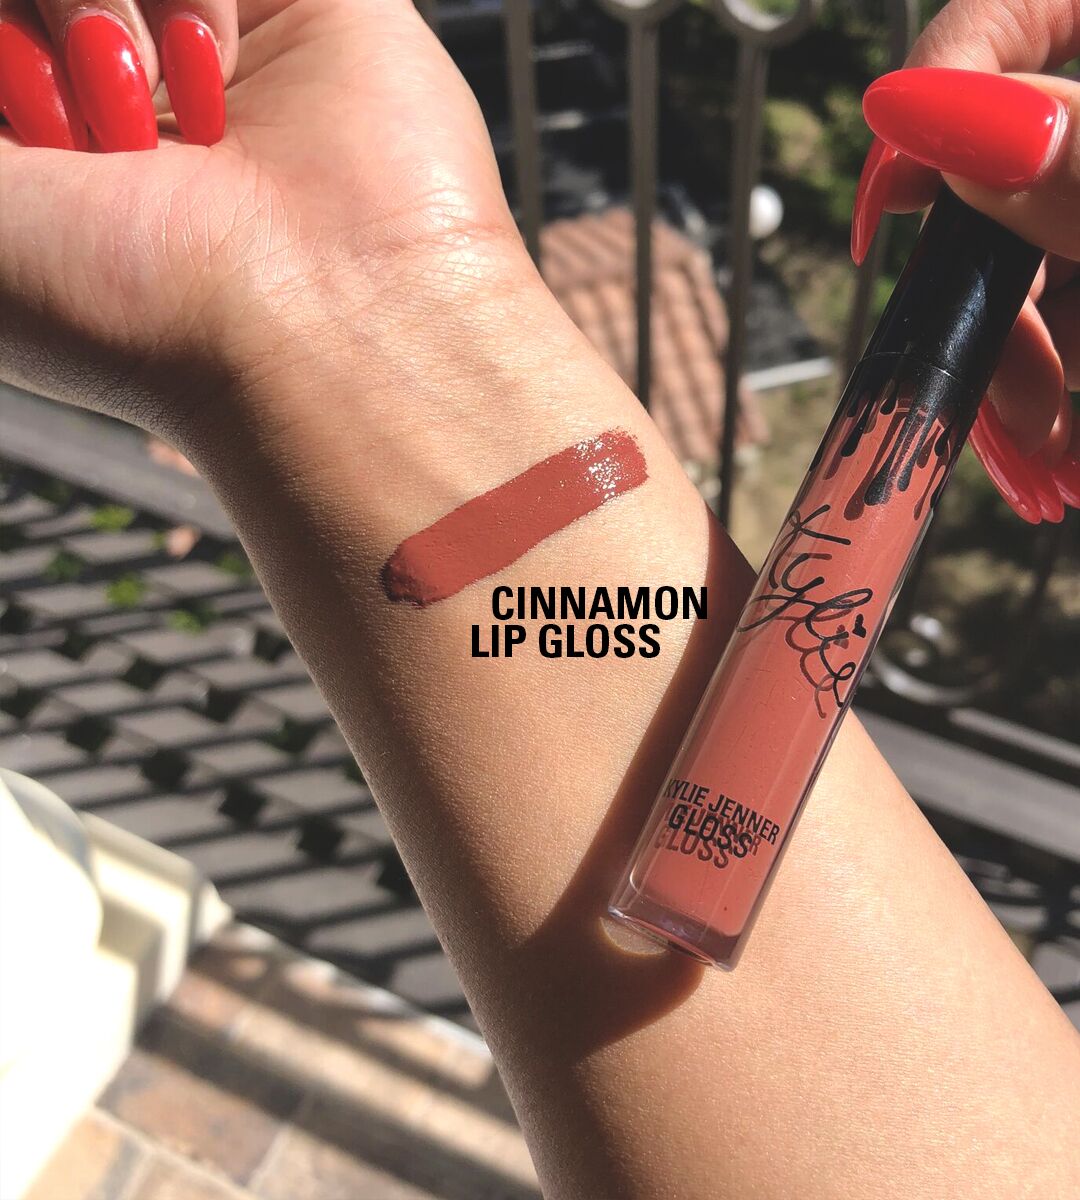 I also restocked Cinnamon lip gloss, from the holiday edition Spice Set! https://t.co/bDaiohhXCV @kyliecosmetics https://t.co/YYrMKrPC5L